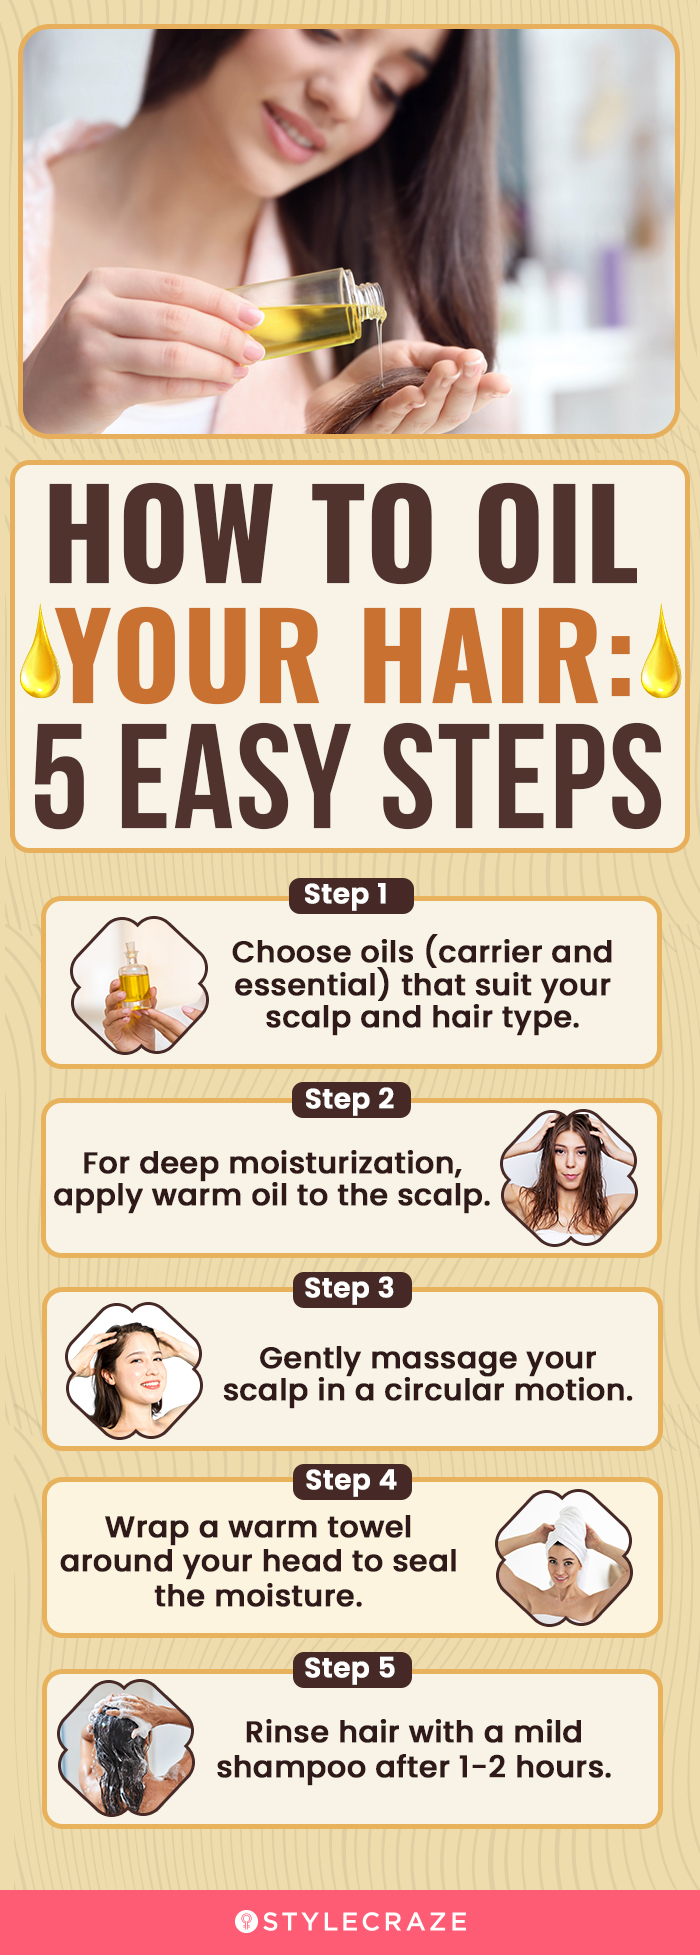 how to oil your hair 5 easy steps (infographic)